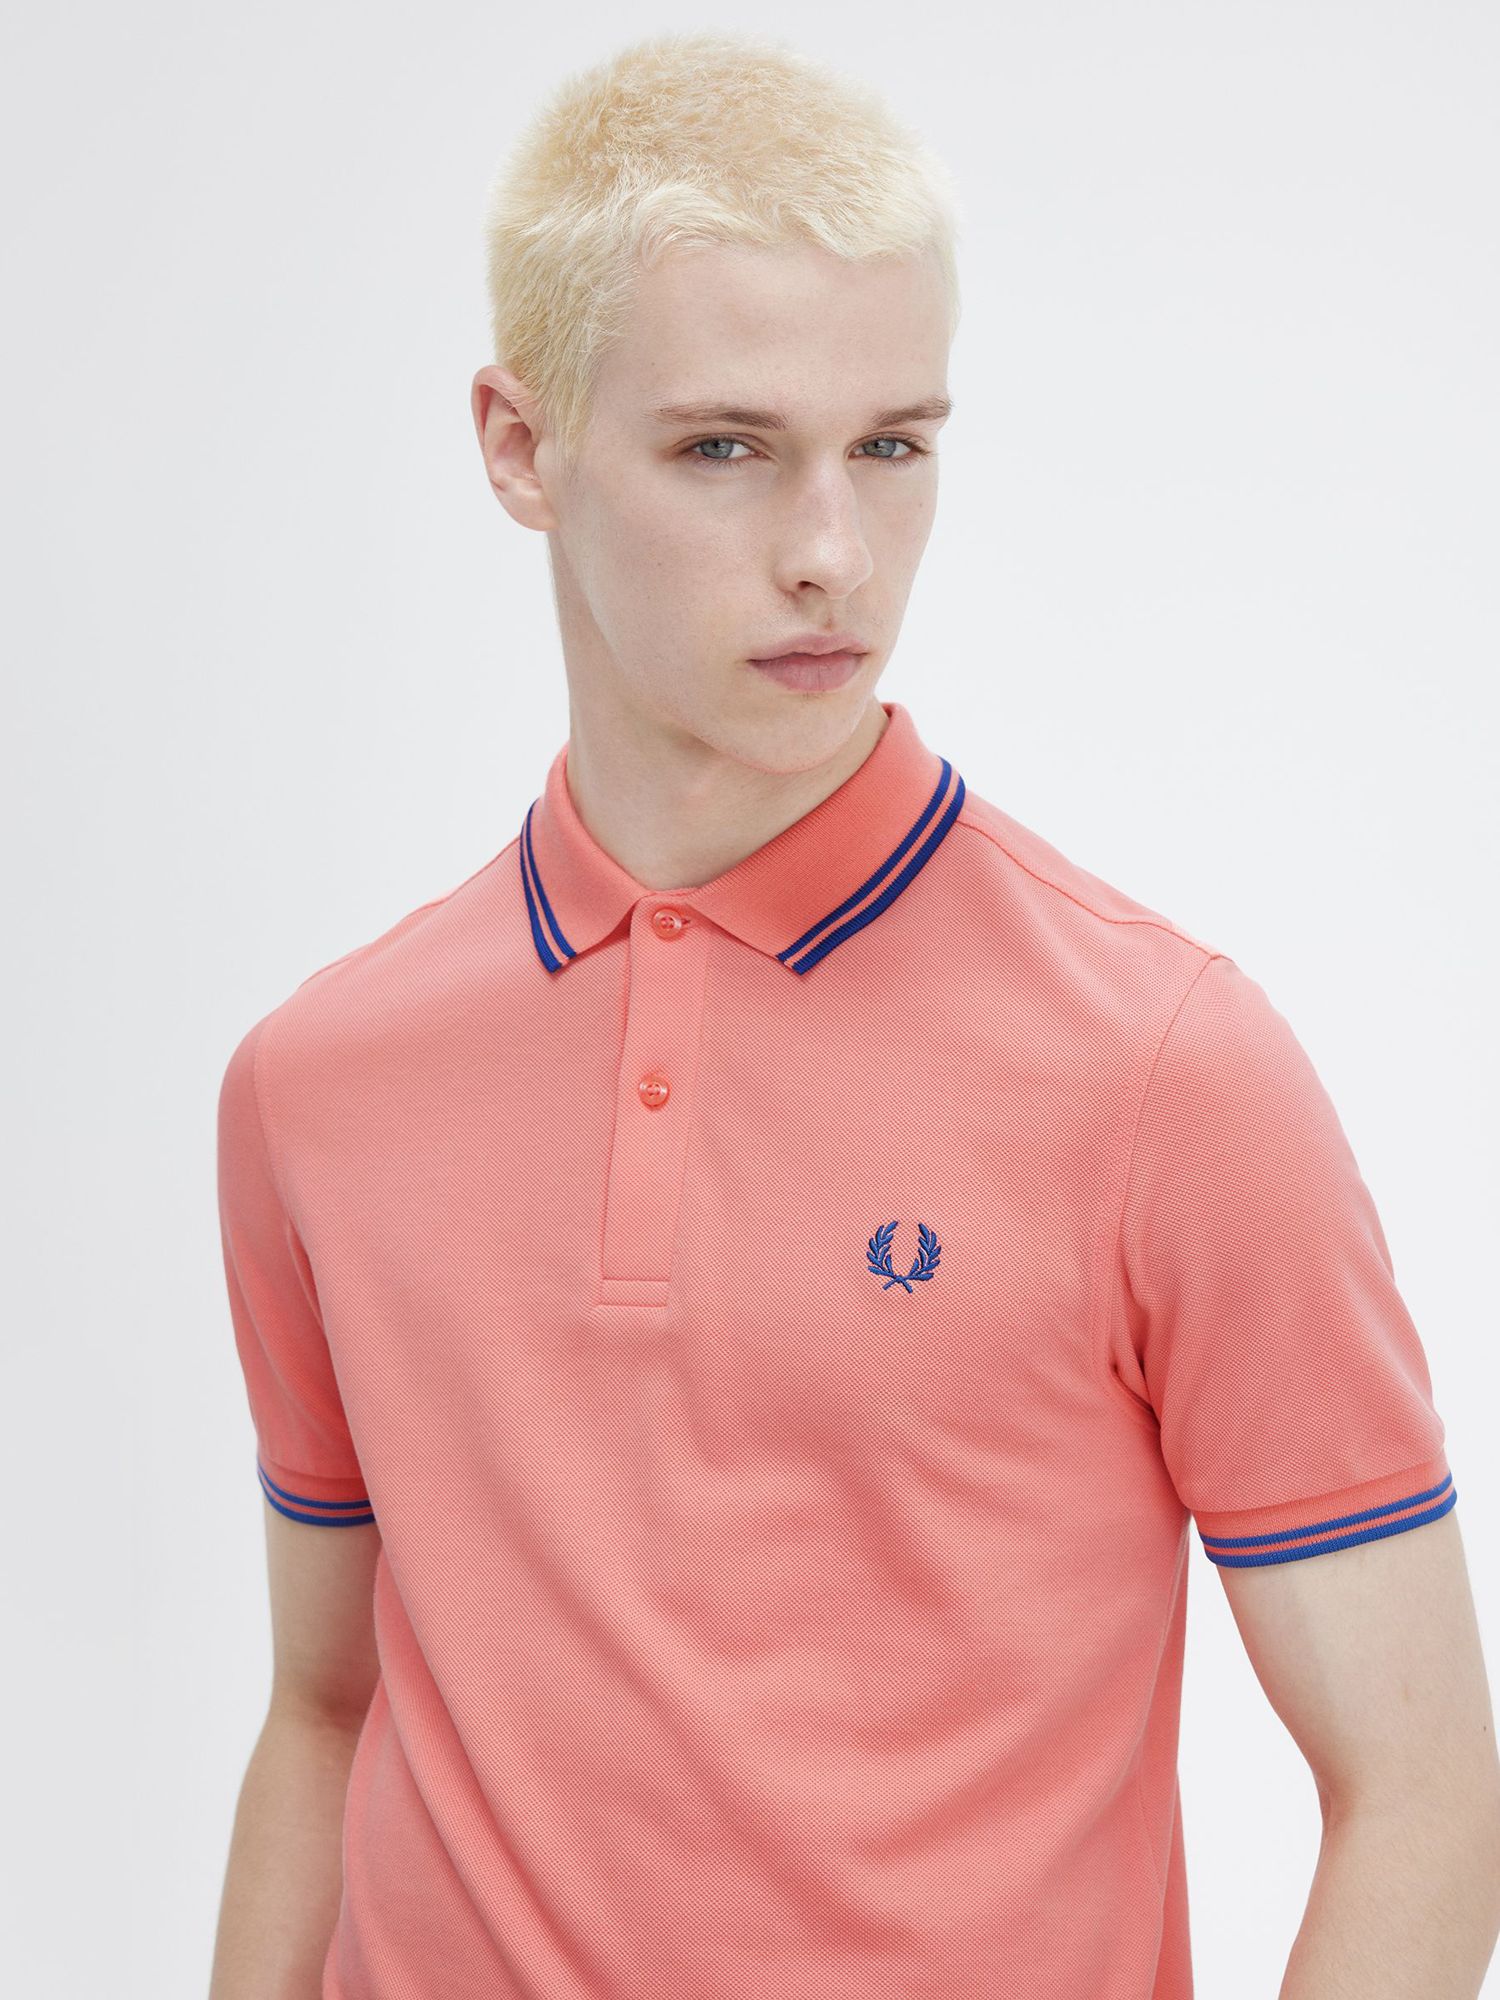 Buy Fred Perry The Twin Tipped Short Sleeve T-Shirt Online at johnlewis.com